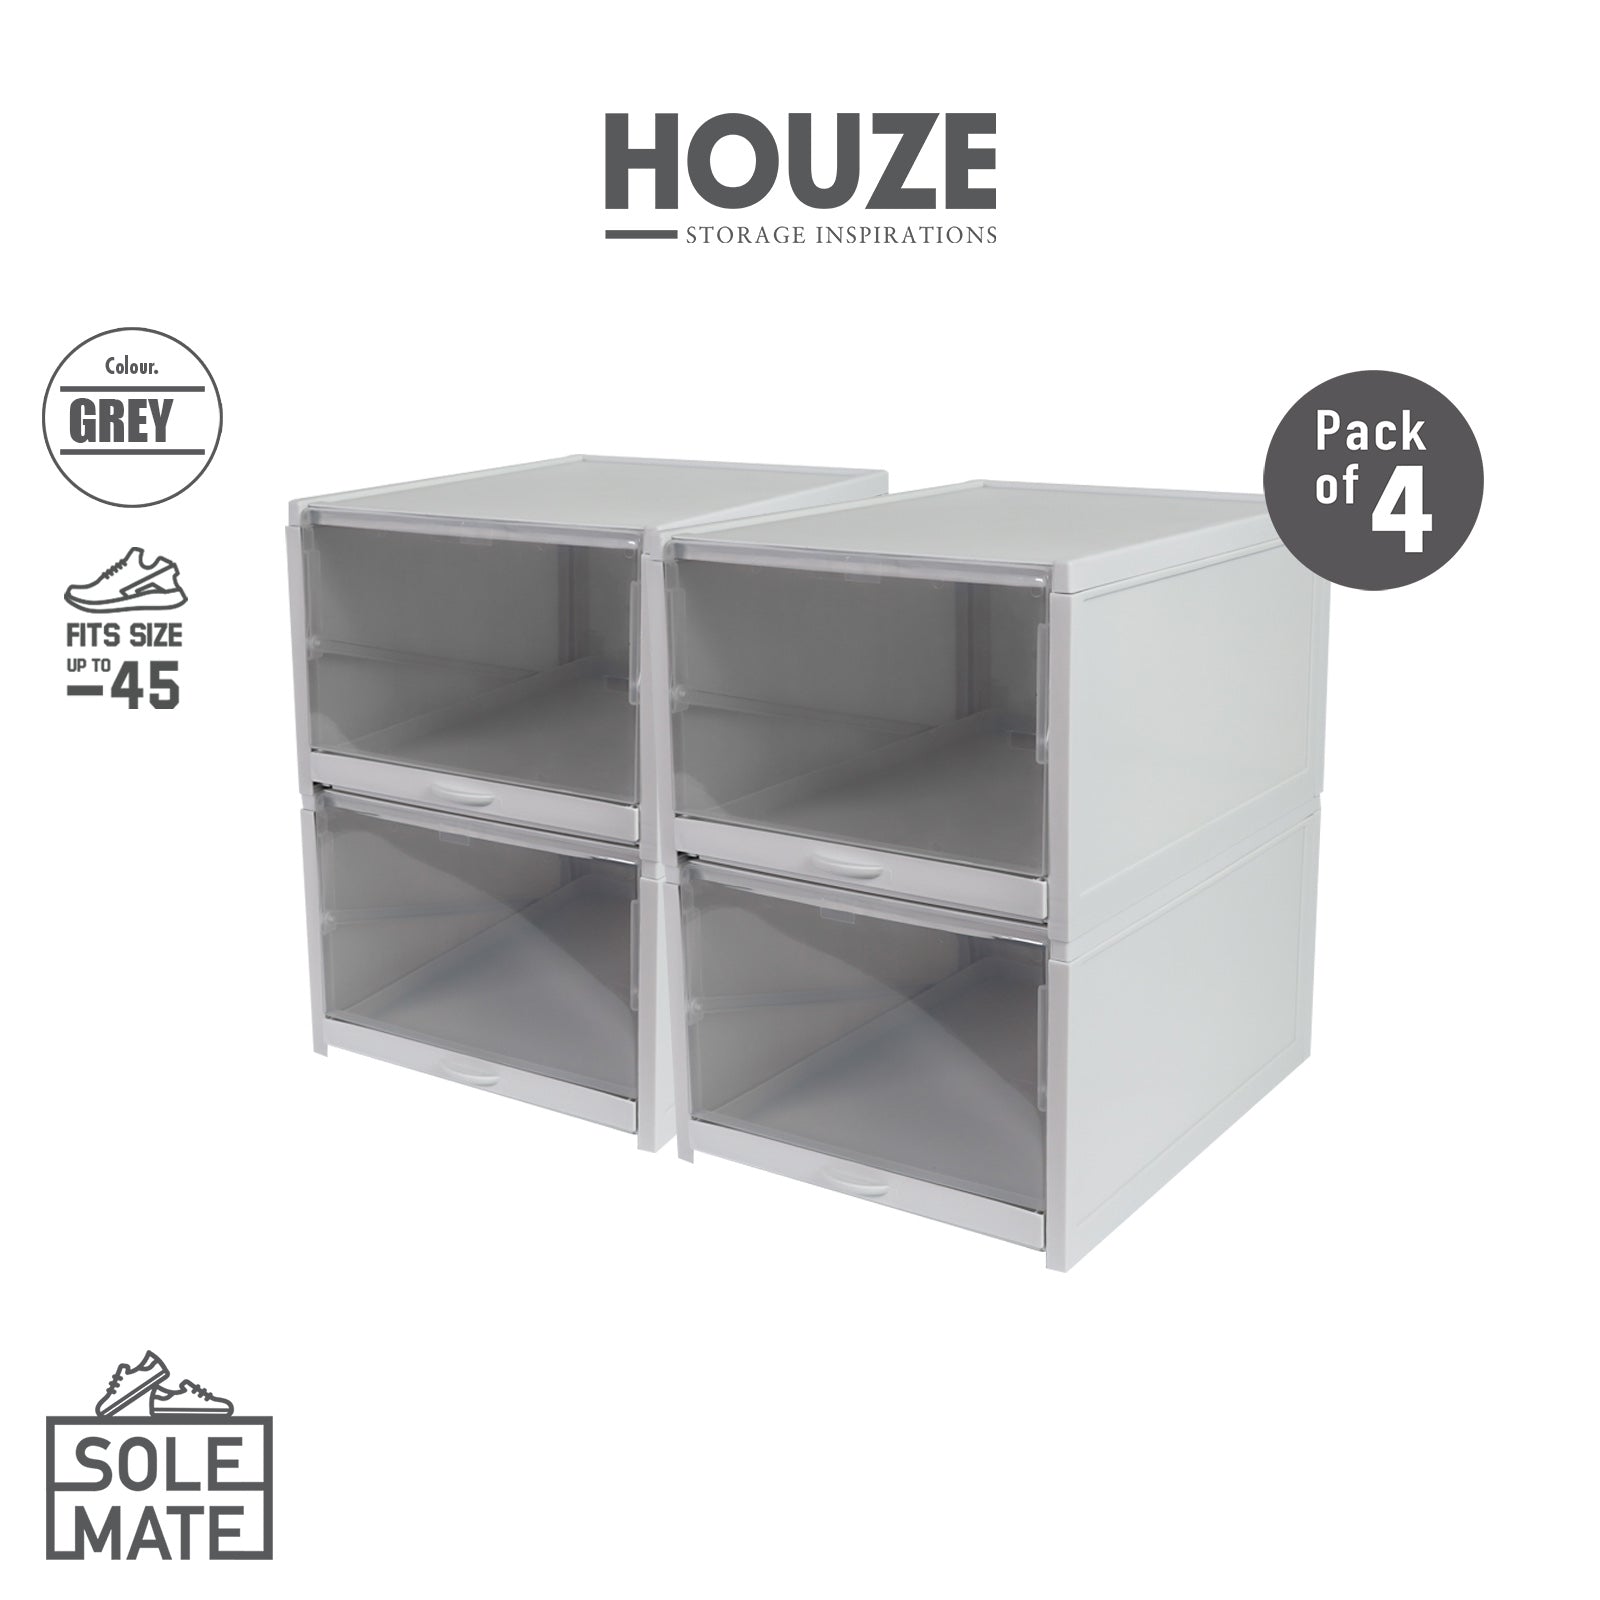 HOUZE - SoleMate - Slidey Front Drop Shoe Drawer Shoe Boxes (Pack of 4)